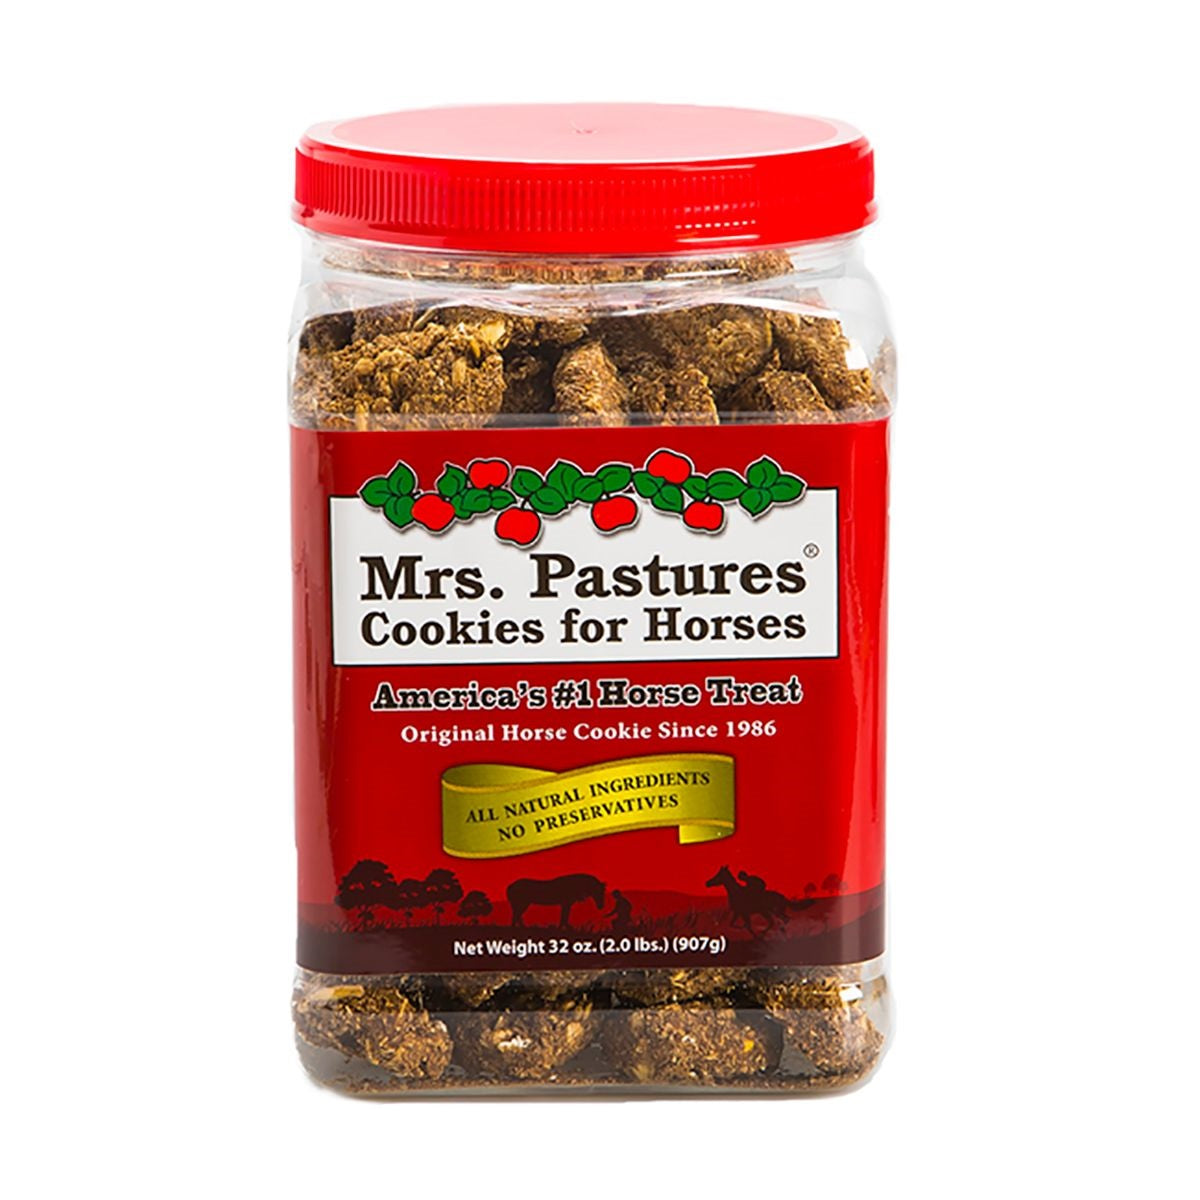 Mrs. Pastures Cookies For Horses 32 oz.